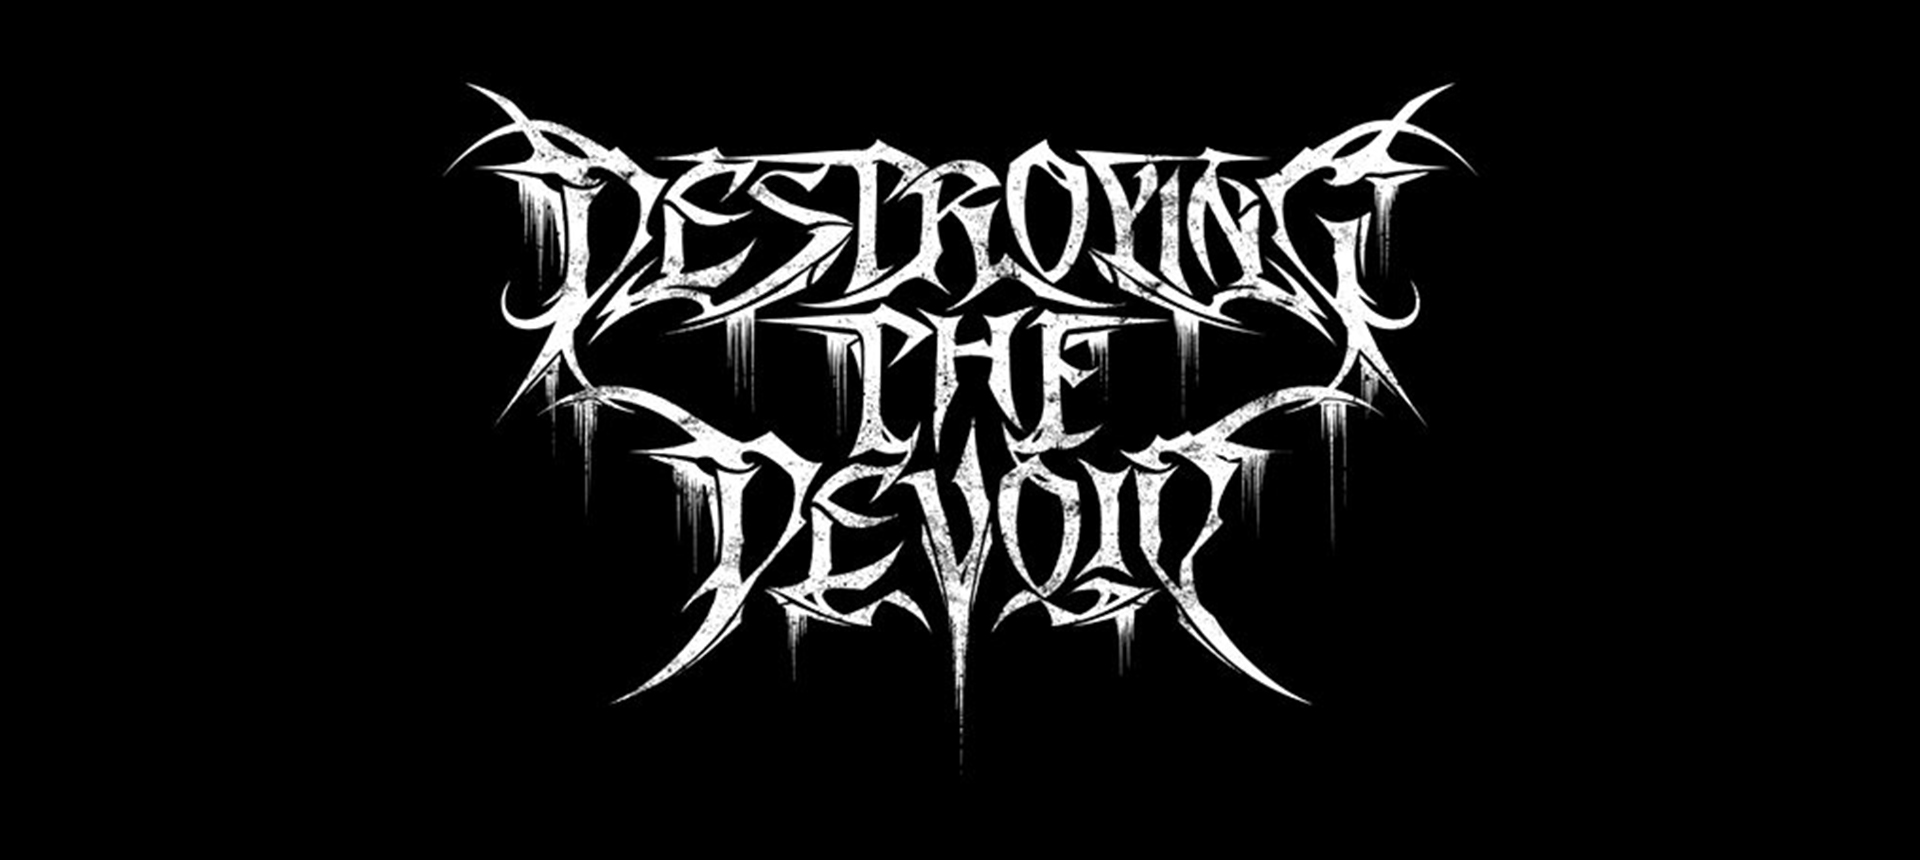 Shop Destroying The Devoid Merchandise and music products including vinyls and cd